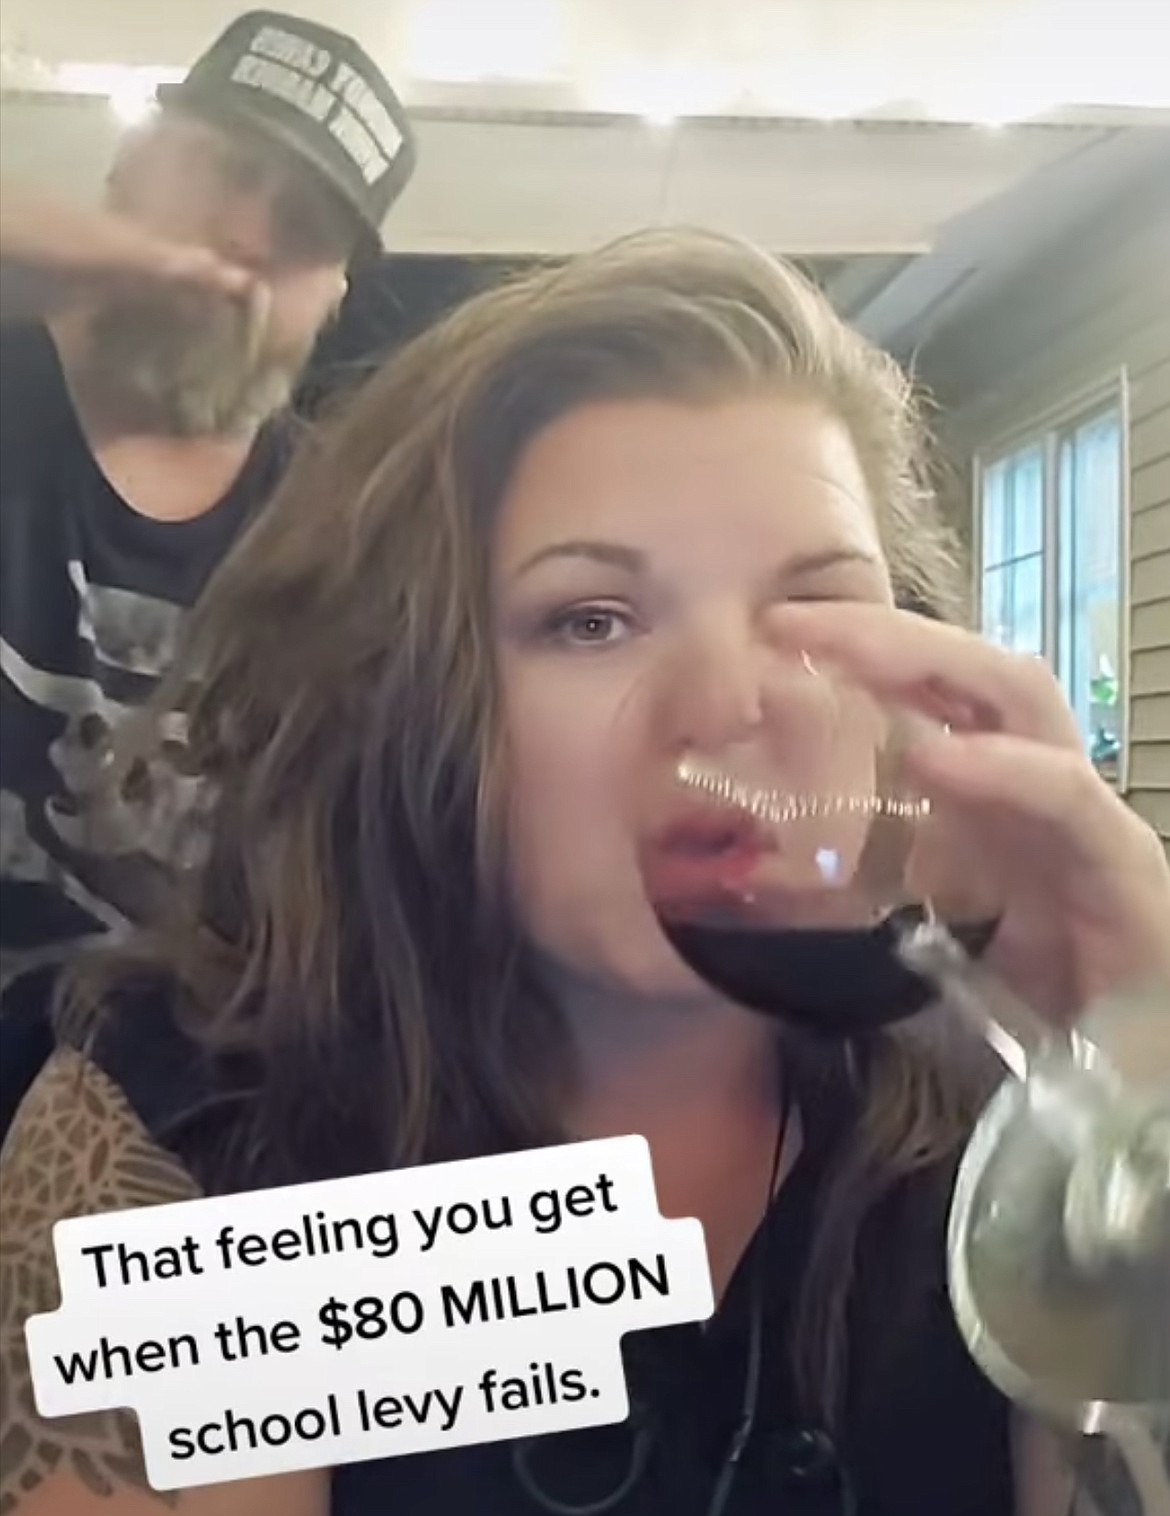 Erin Barnard of the Kootenai County Spectator blog is seen presumably with her husband in this TikTok video, drinking wine and celebrating the failure of the Coeur d'Alene School District's levy election.